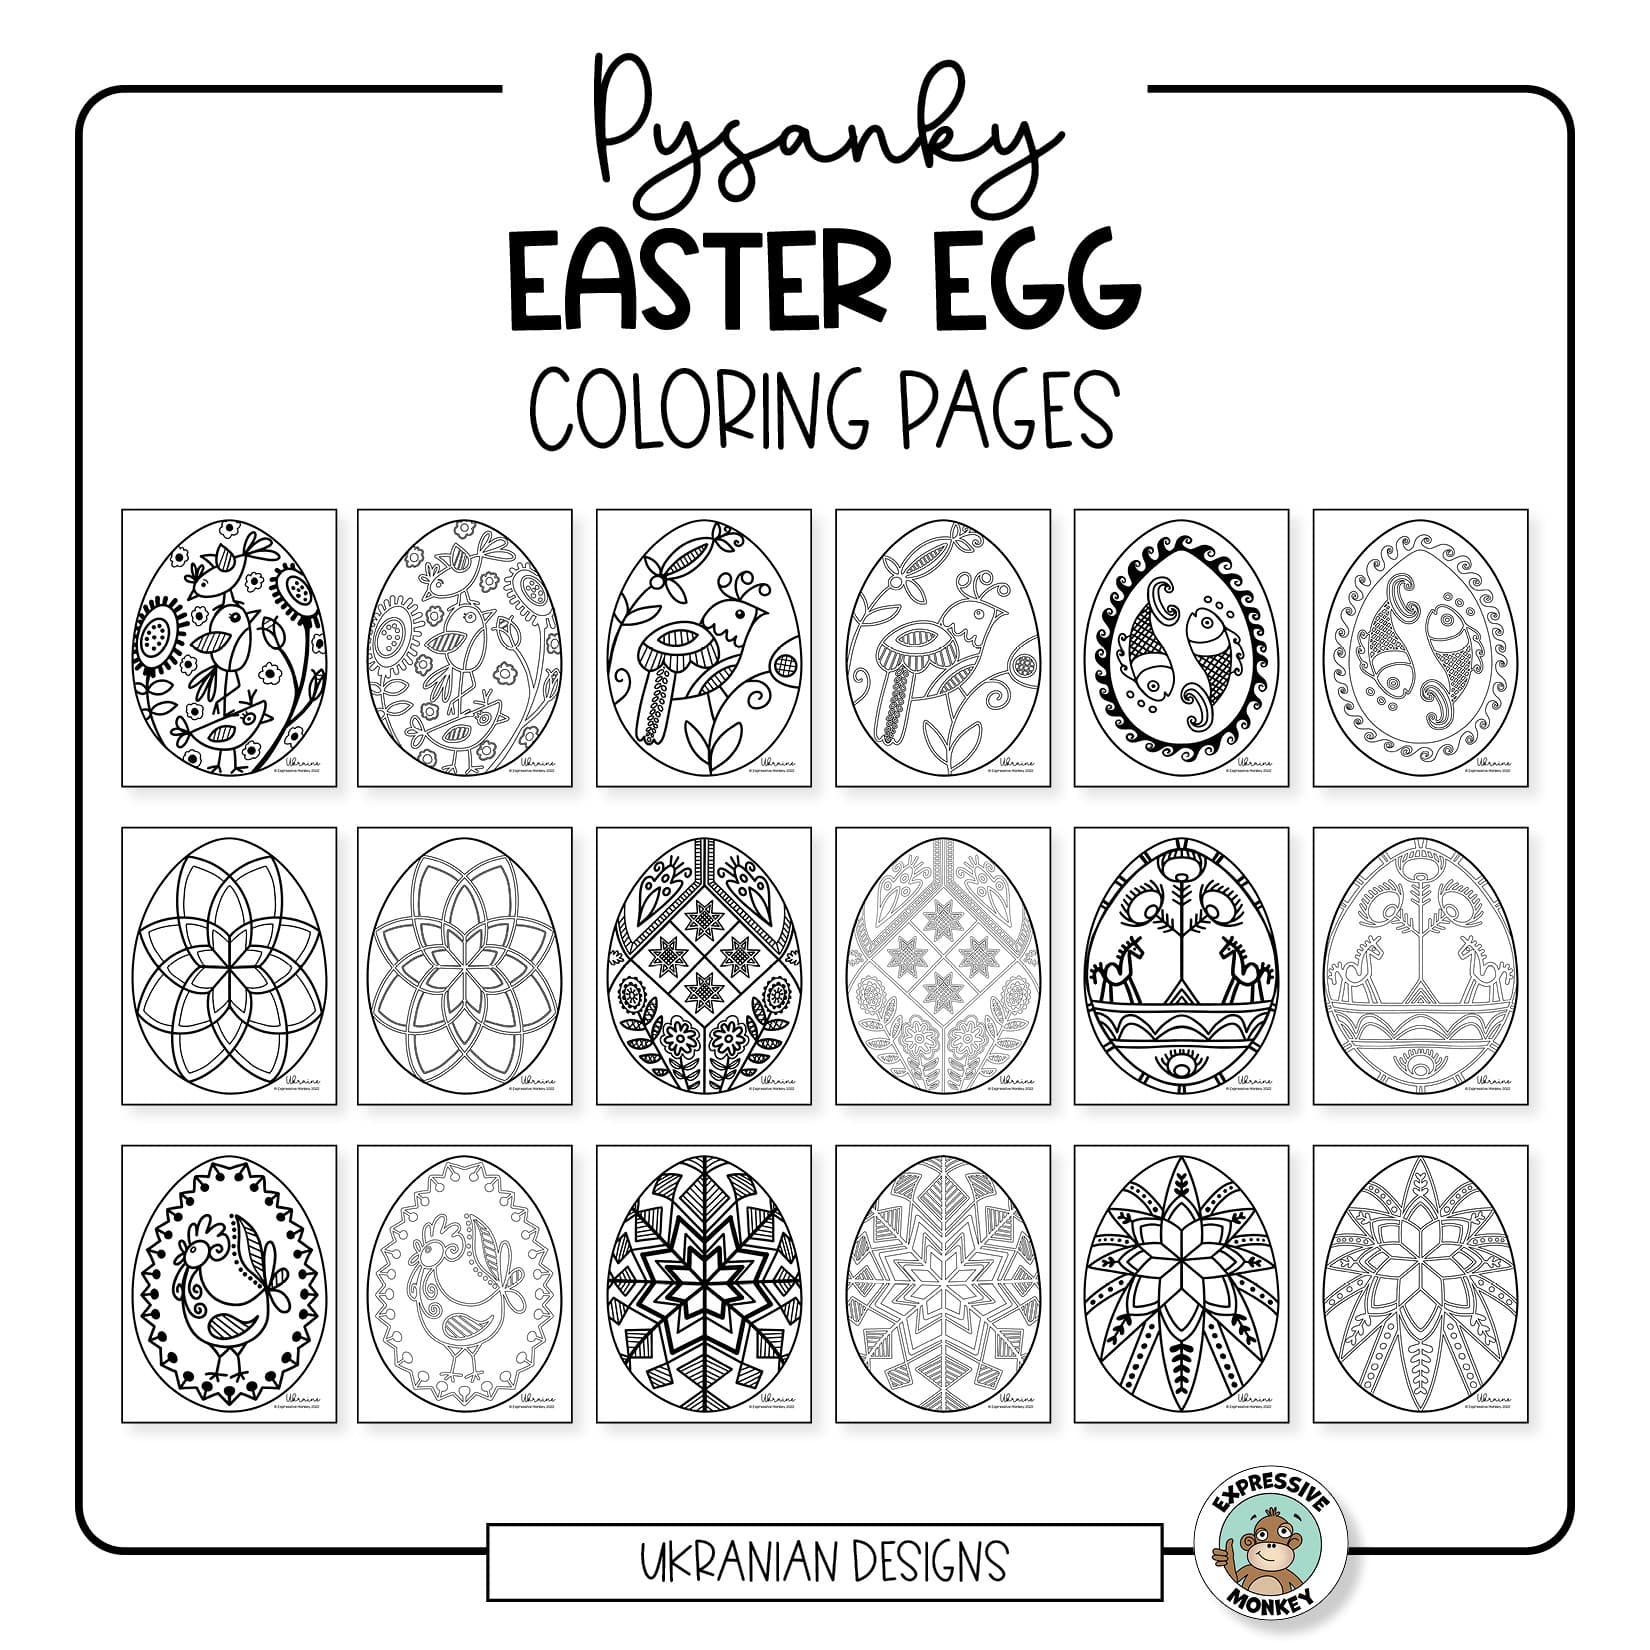 Pysanky eggs coloring pages